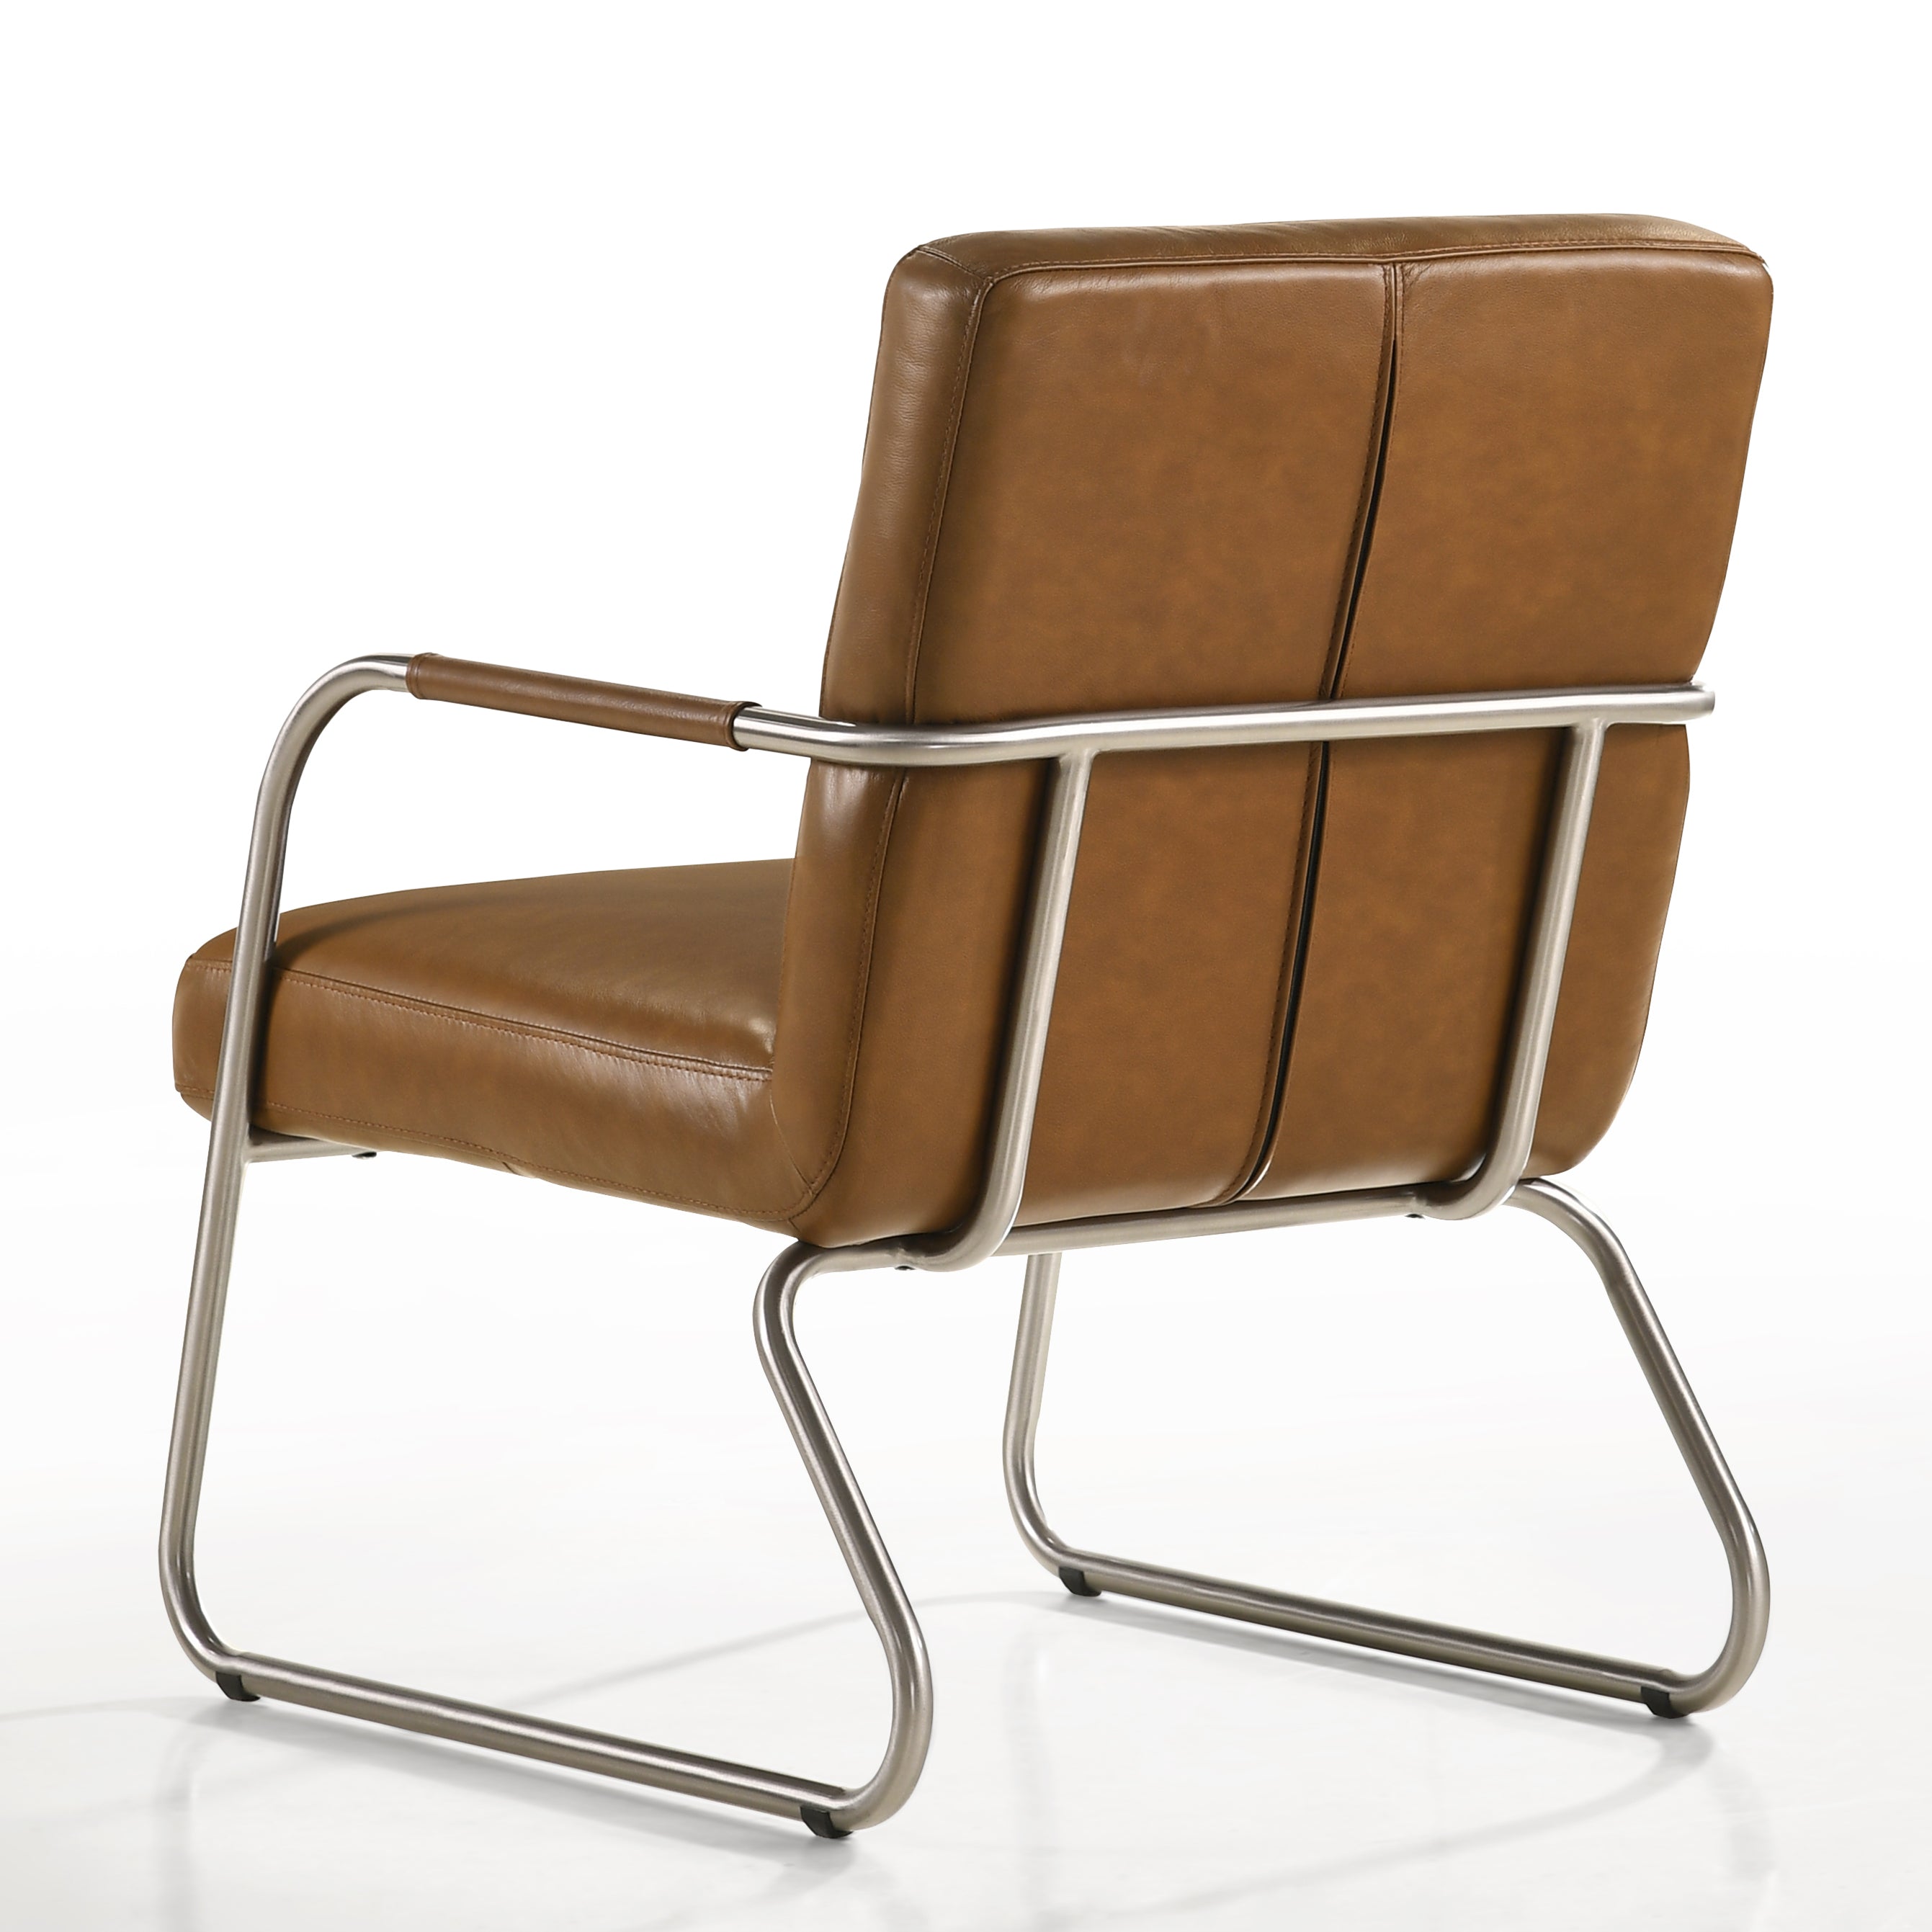 Spencer Stainless Steel Leather Lounge Accent Chair, Caramel Brown